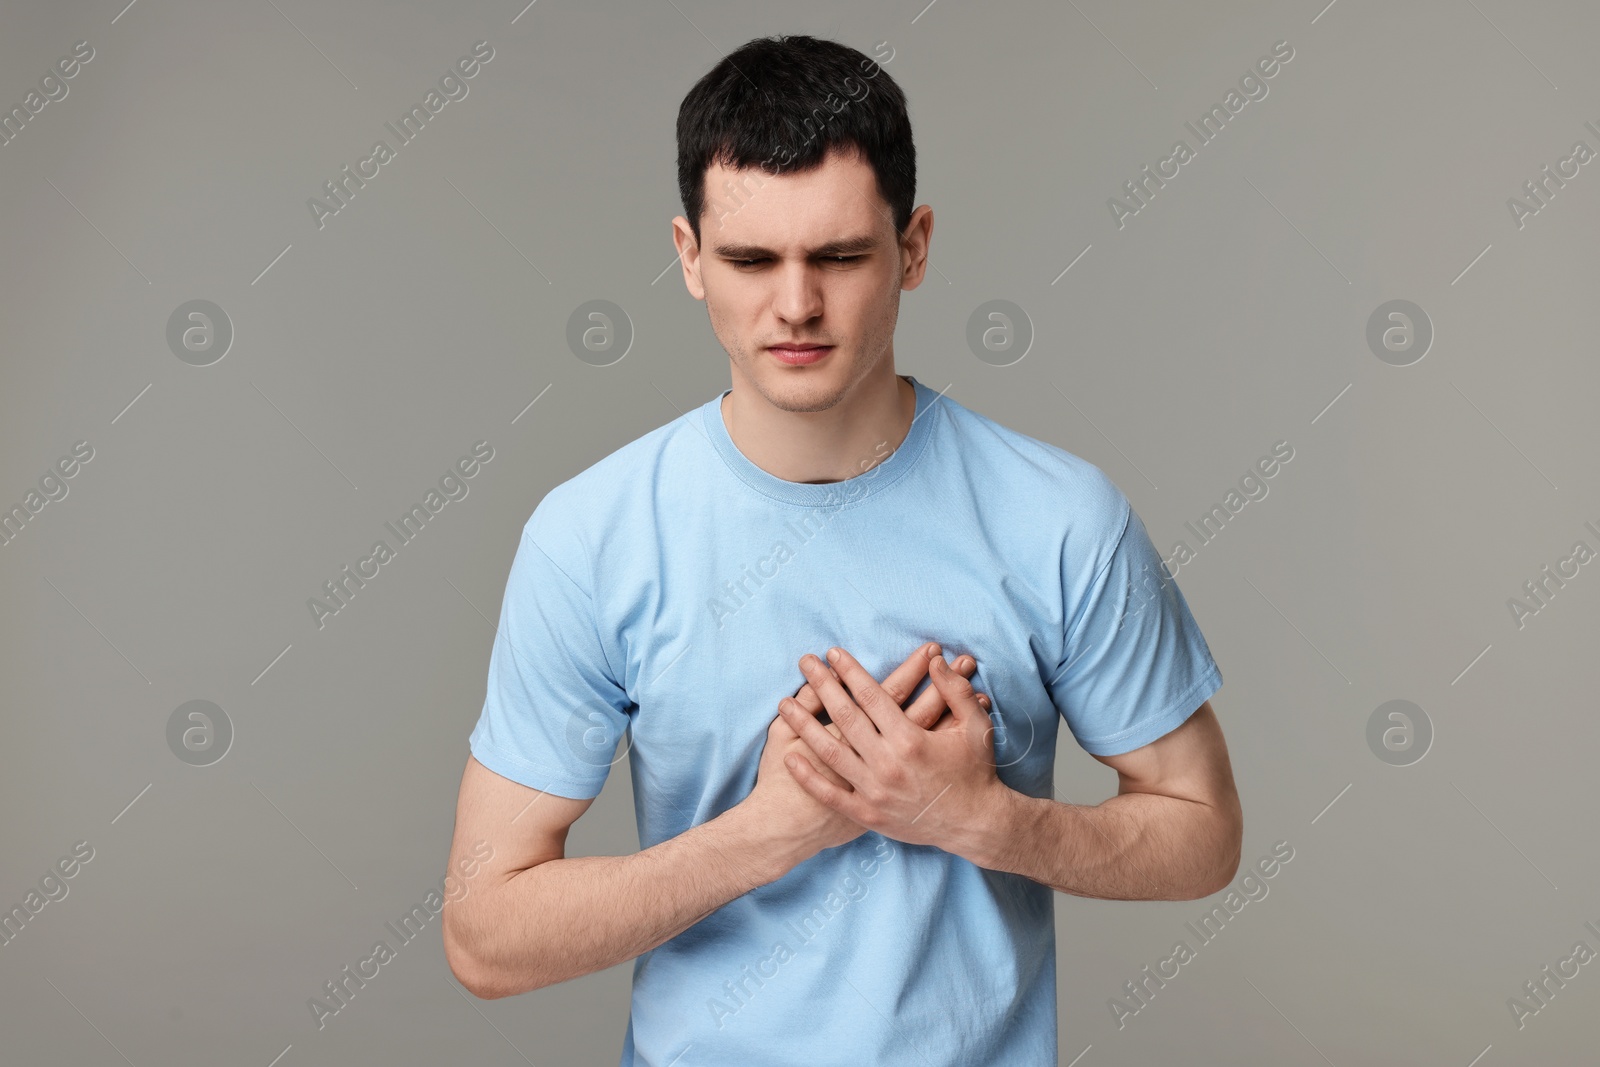 Photo of Man suffering from heart hurt on grey background